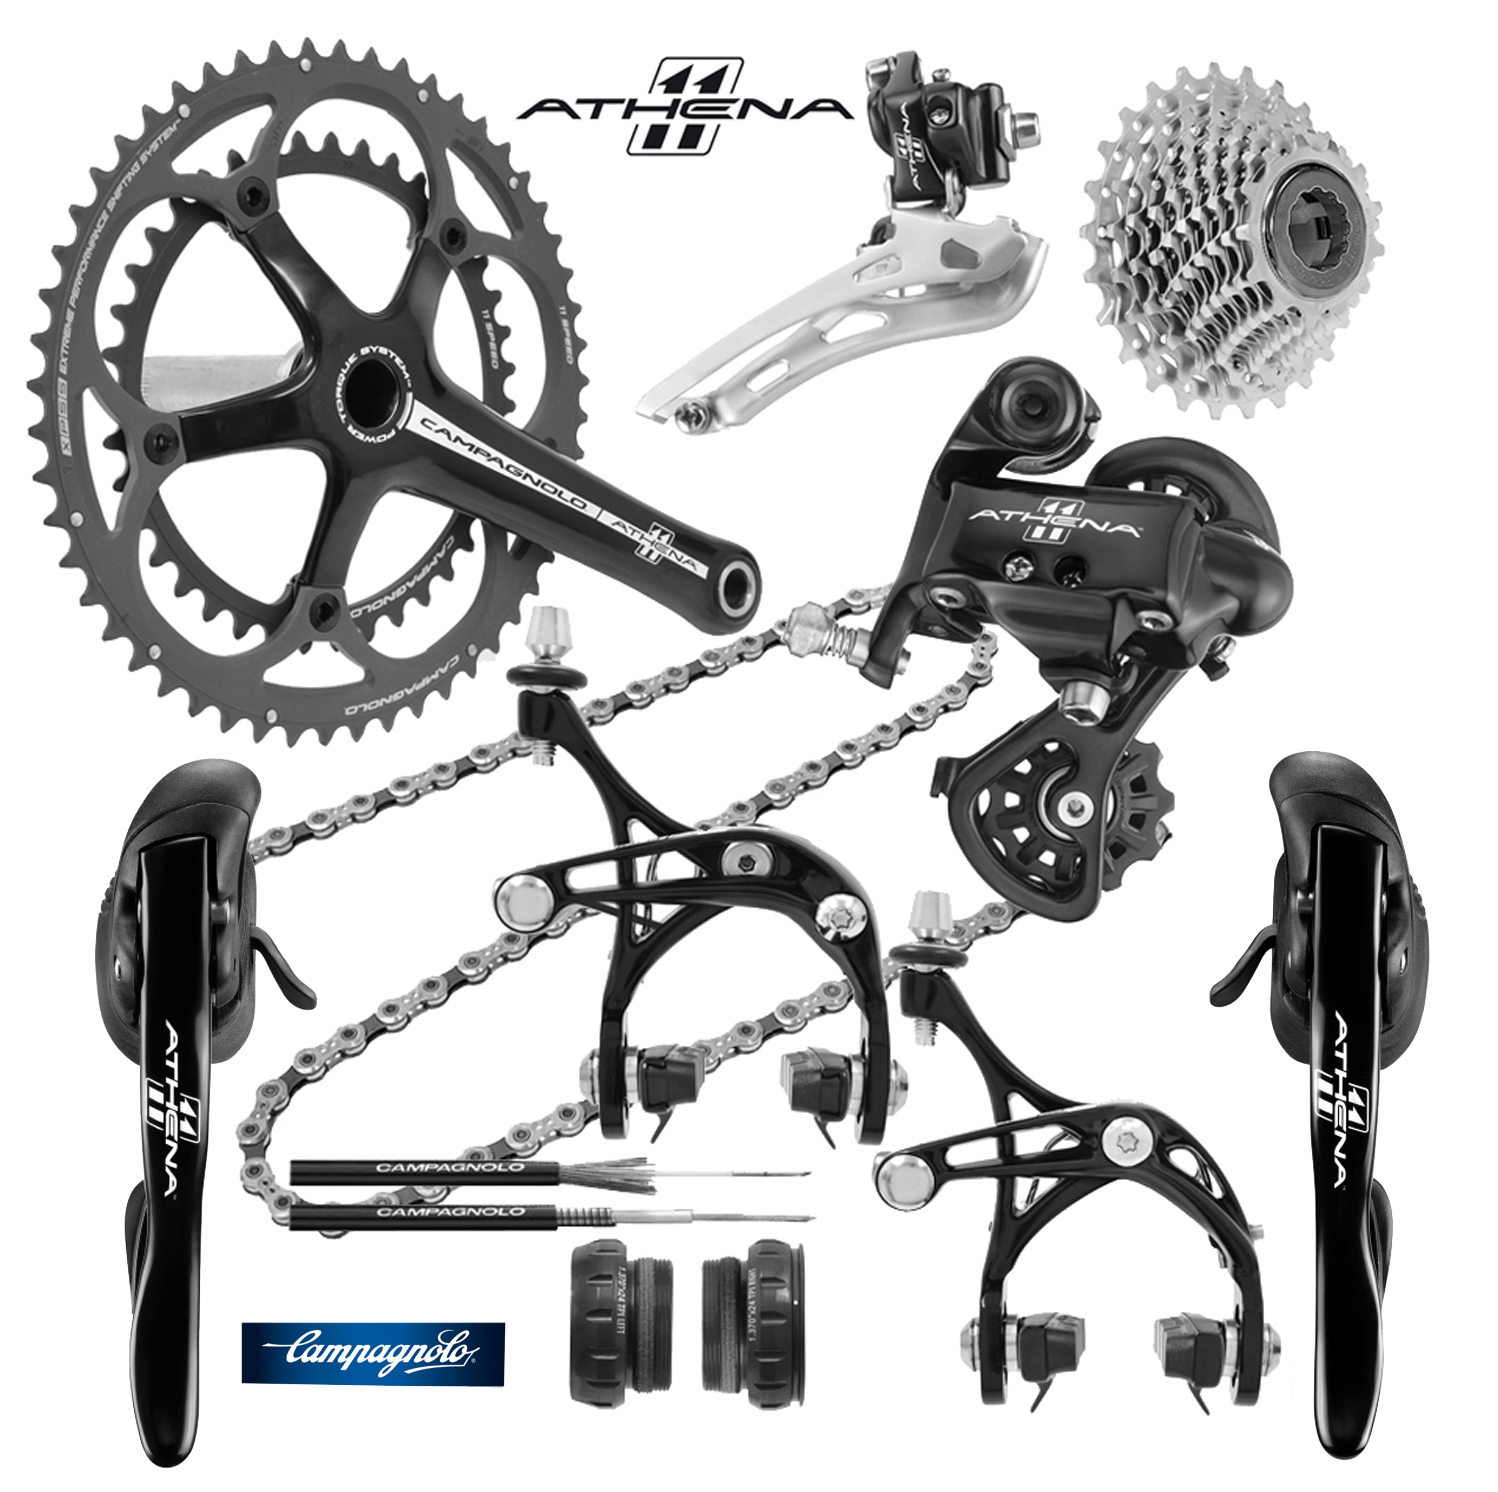 Campagnolo Athena Carbon 11-speed Groepset Compact 2014